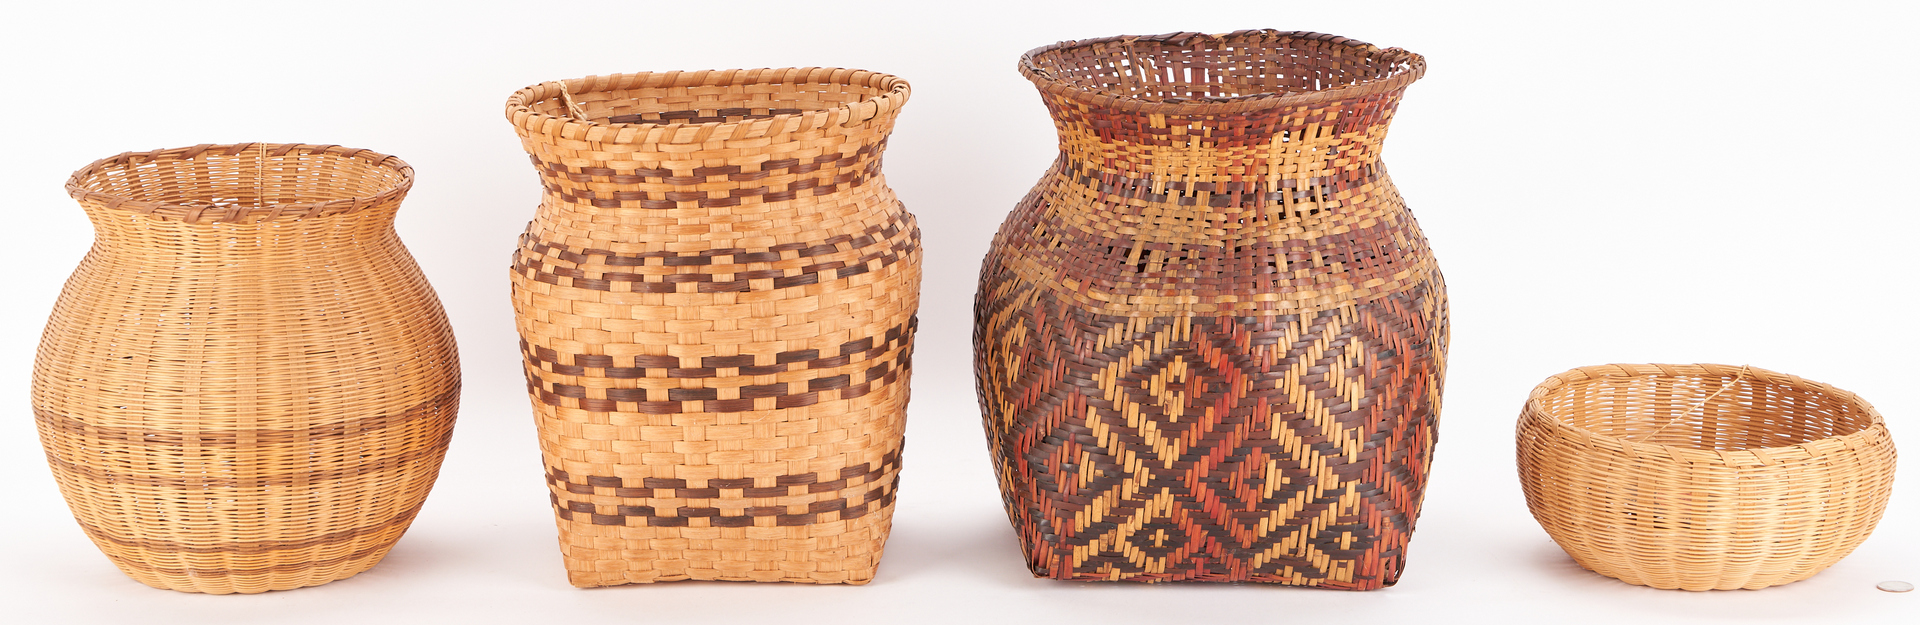 Lot 1021: 4 Cherokee Baskets, incl. Lucy George & Qualla Book, Five (5) Items Total